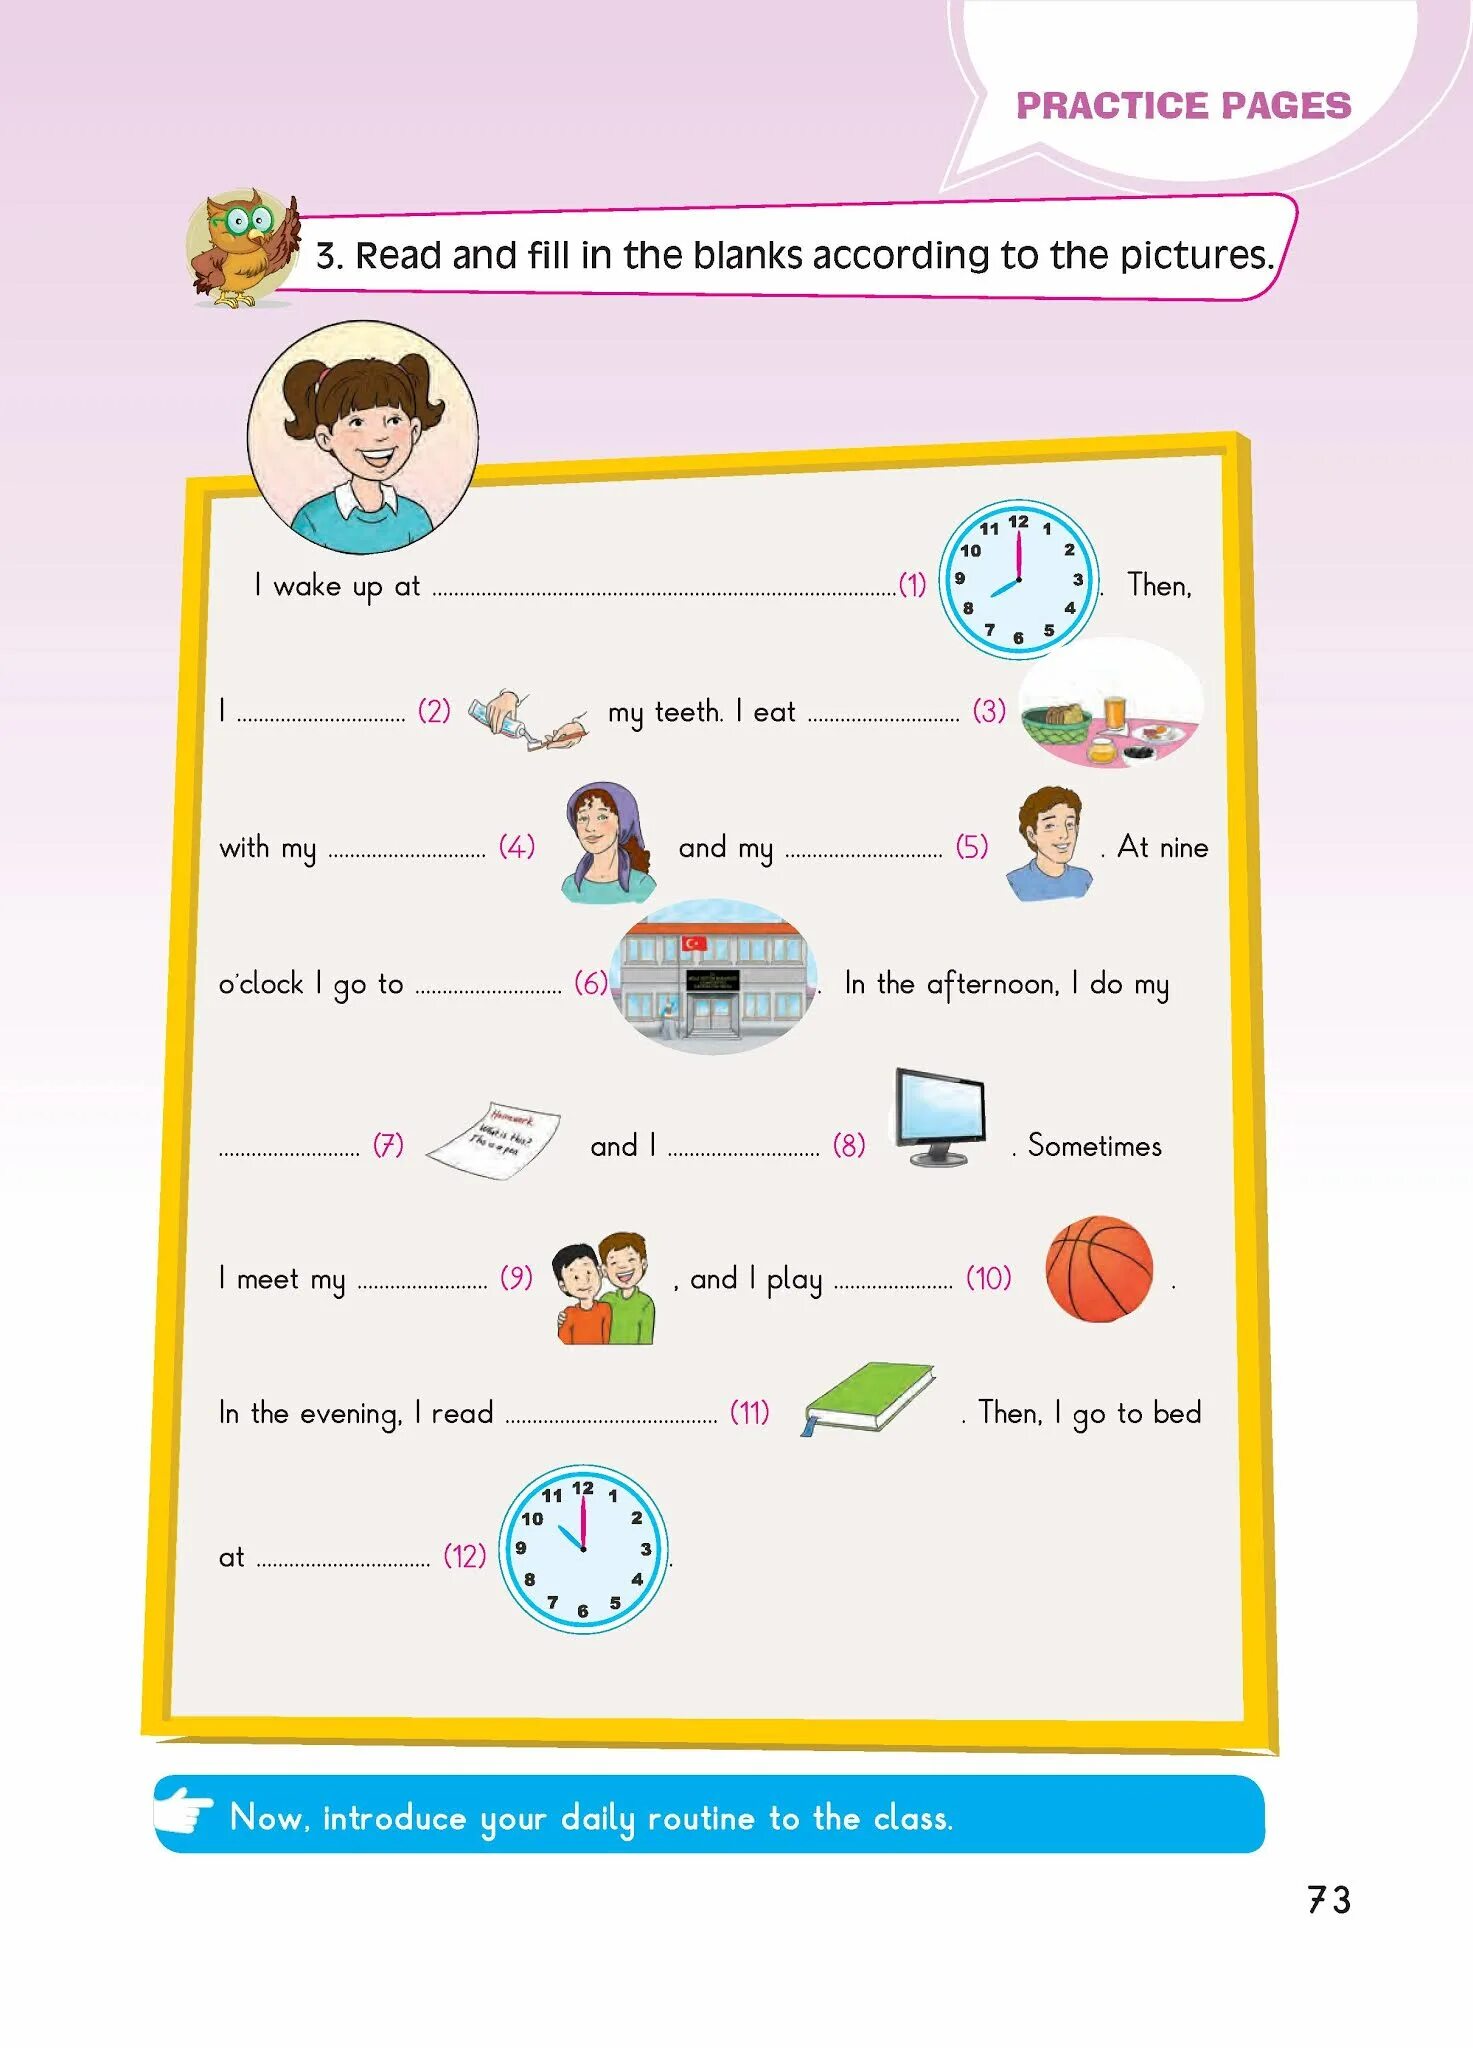 Routine exercises. Daily Routine для детей. Daily Routine задания. Daily Routine Worksheets for Kids. Упражнения Daily Routine present simple.